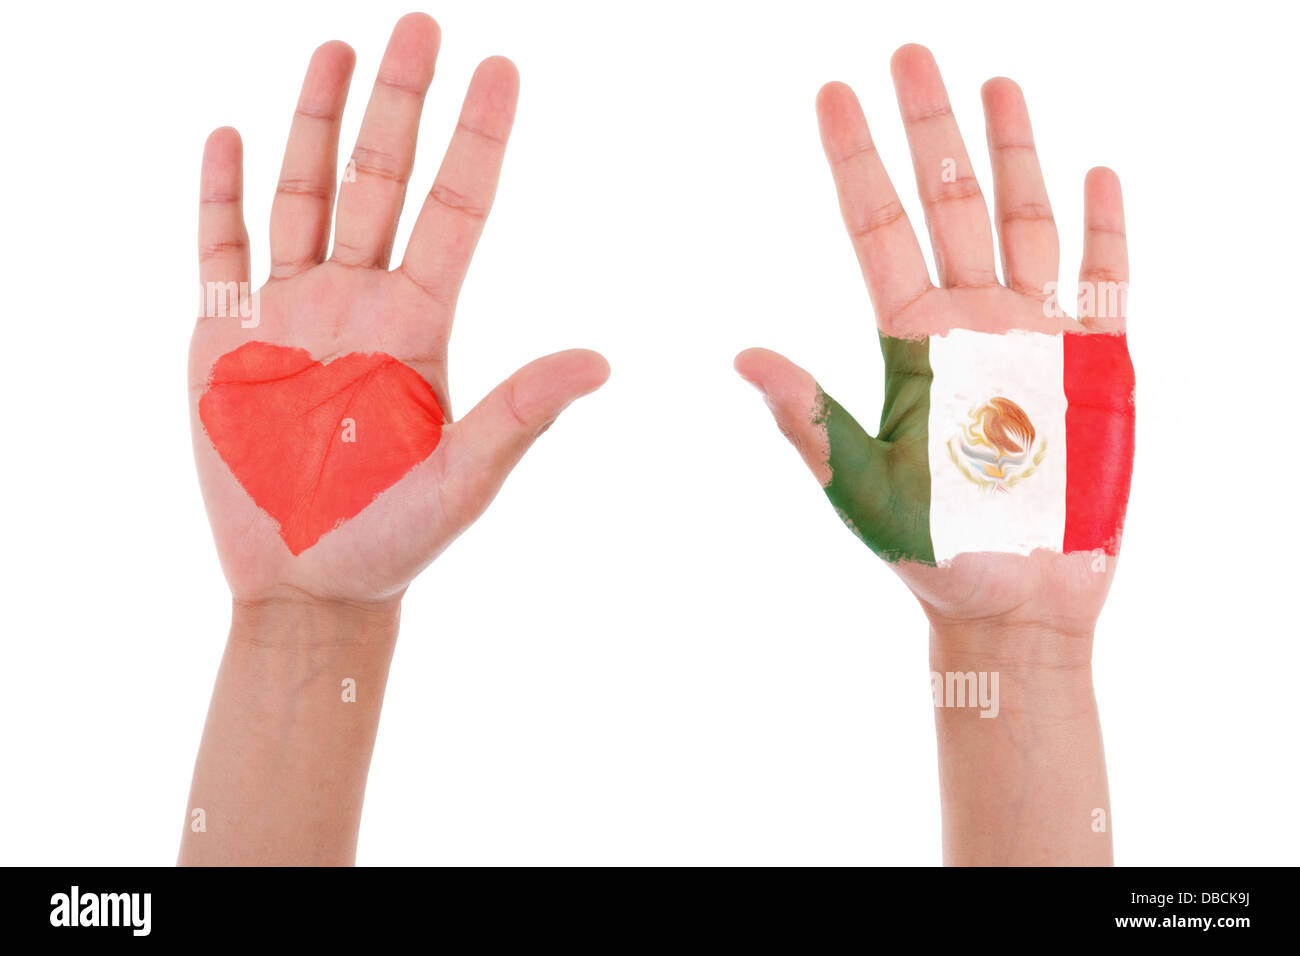 Hands with a painted heart and mexican flag, i love mexico concept, isolated on white background Stock Photo